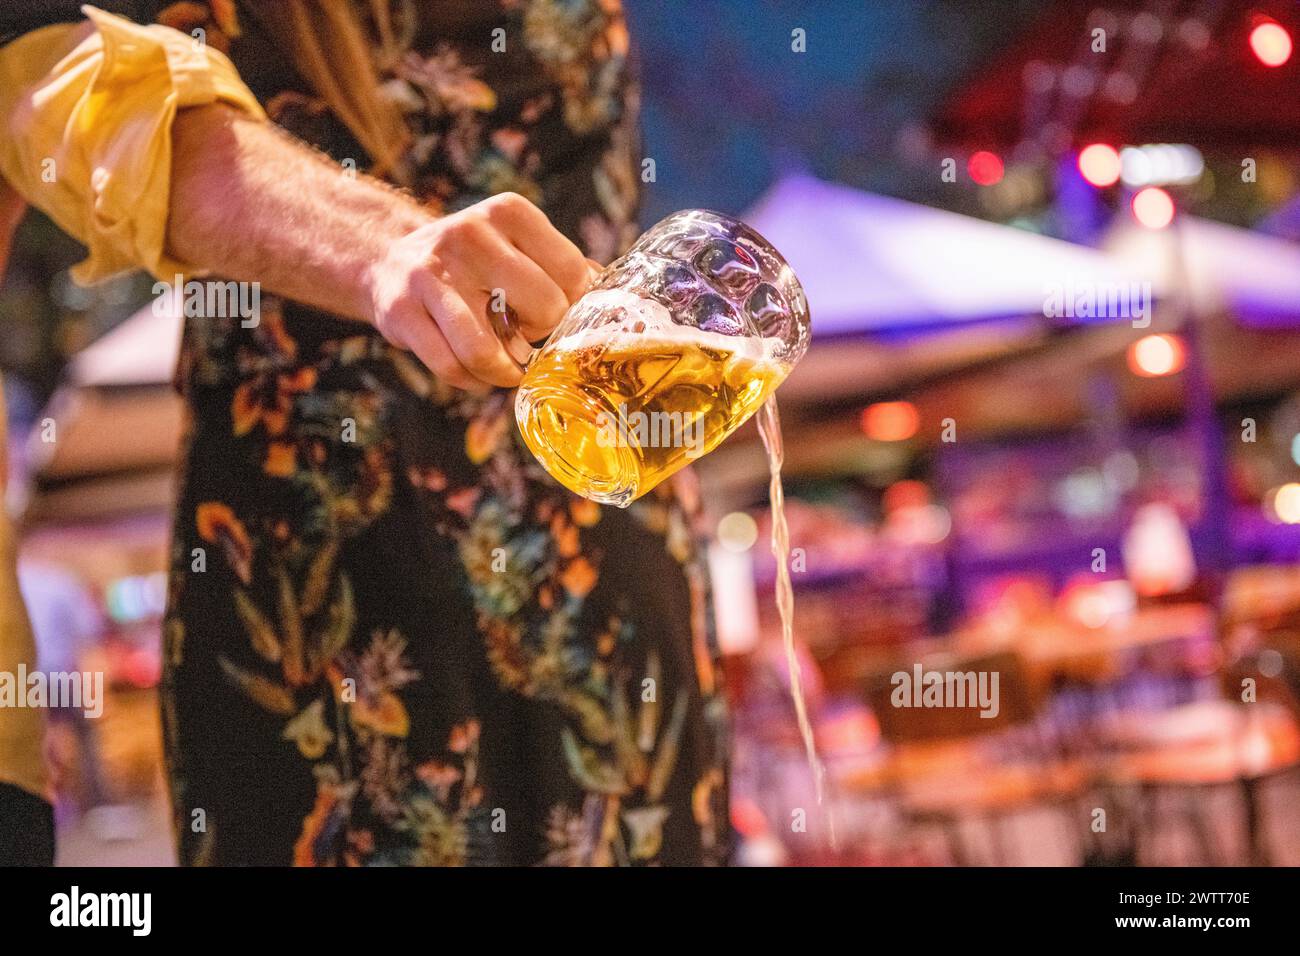 A person pouring a glass of beer with a dynamic splash against a lively bar backdrop. Stock Photo